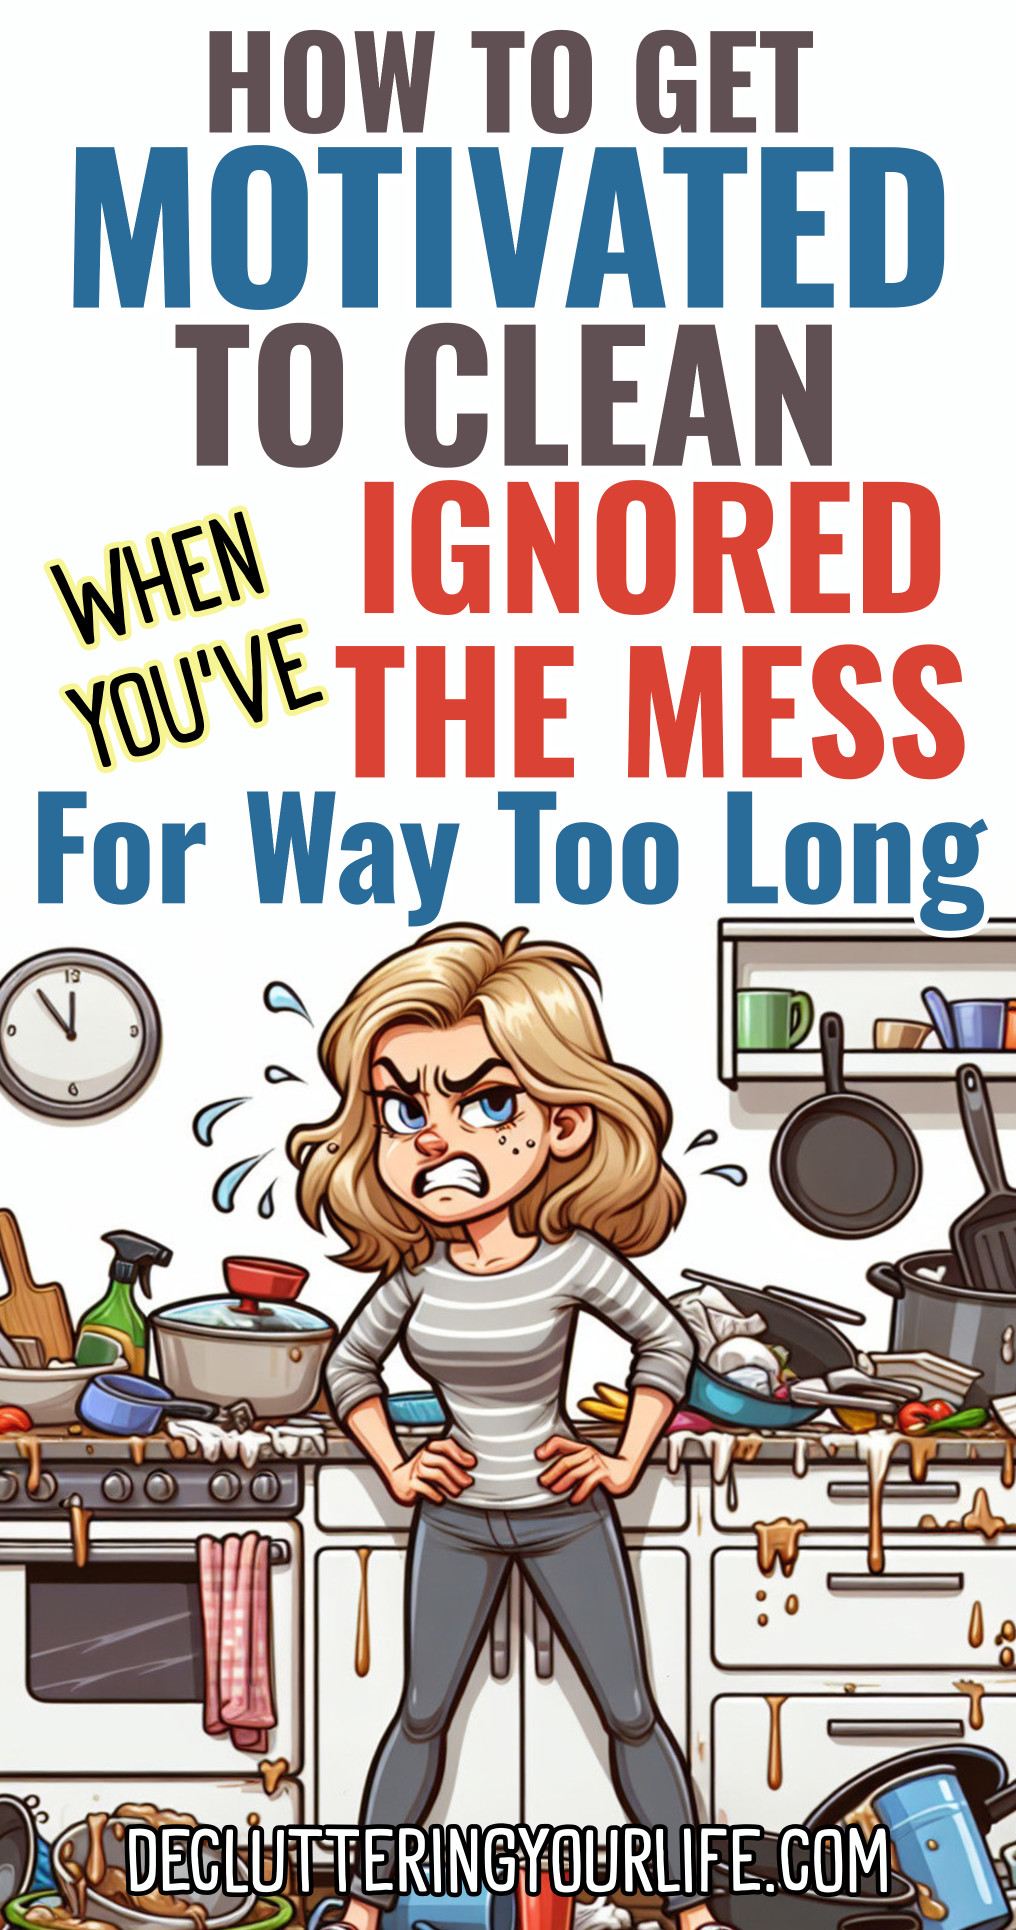 how to get motivated to clean house when ignored the mess for too long